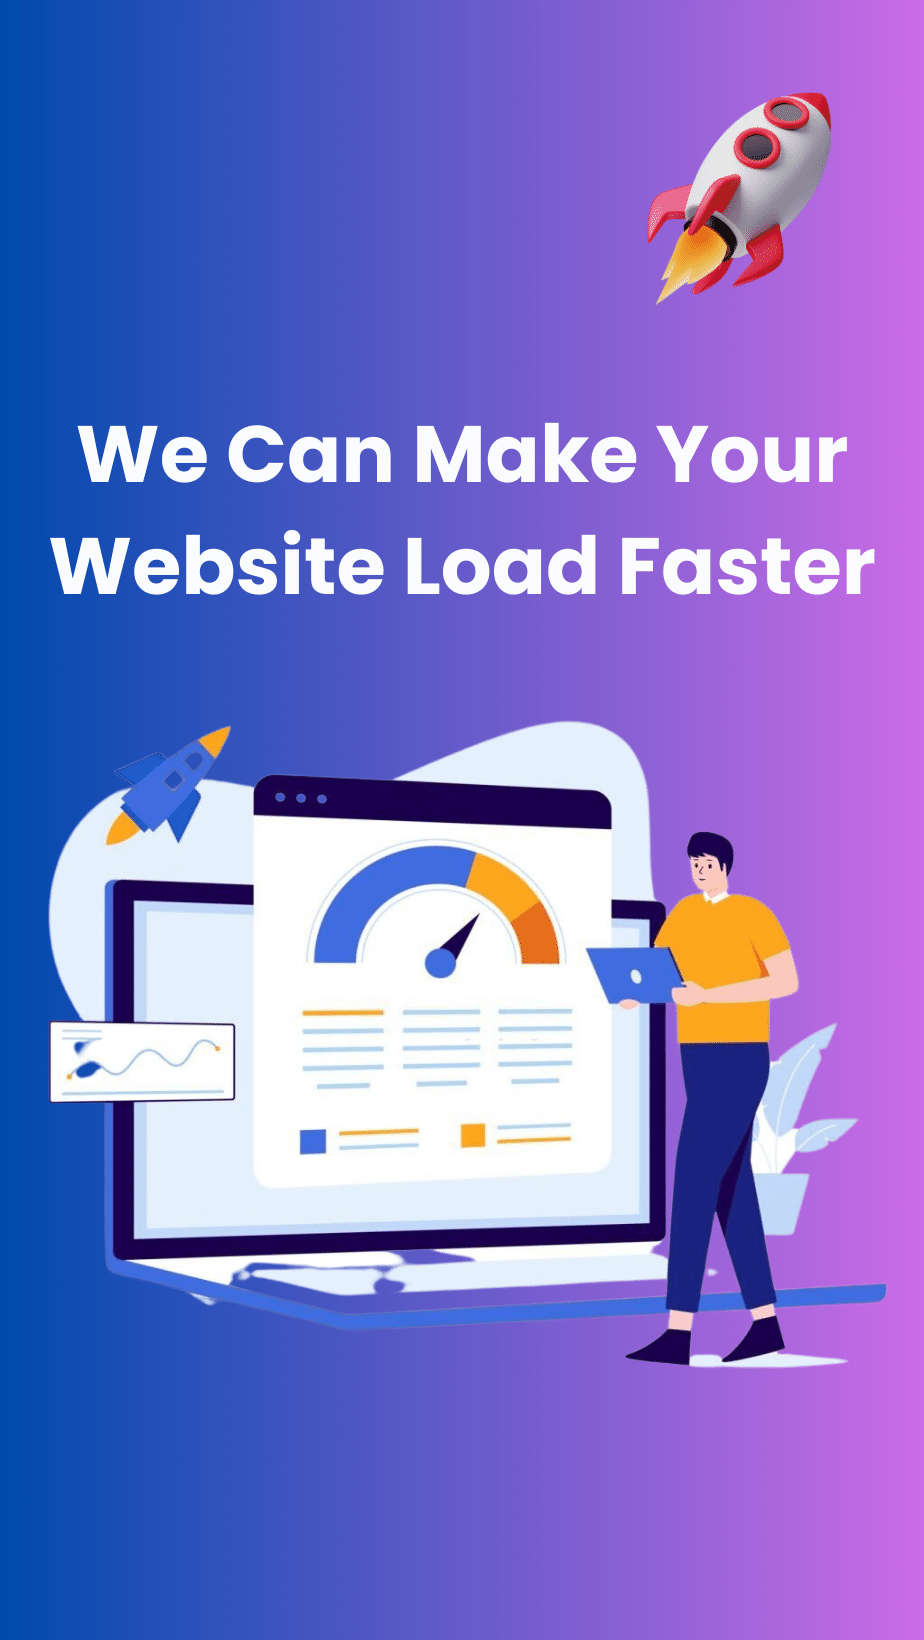 We Can Make Your Website Load Faster